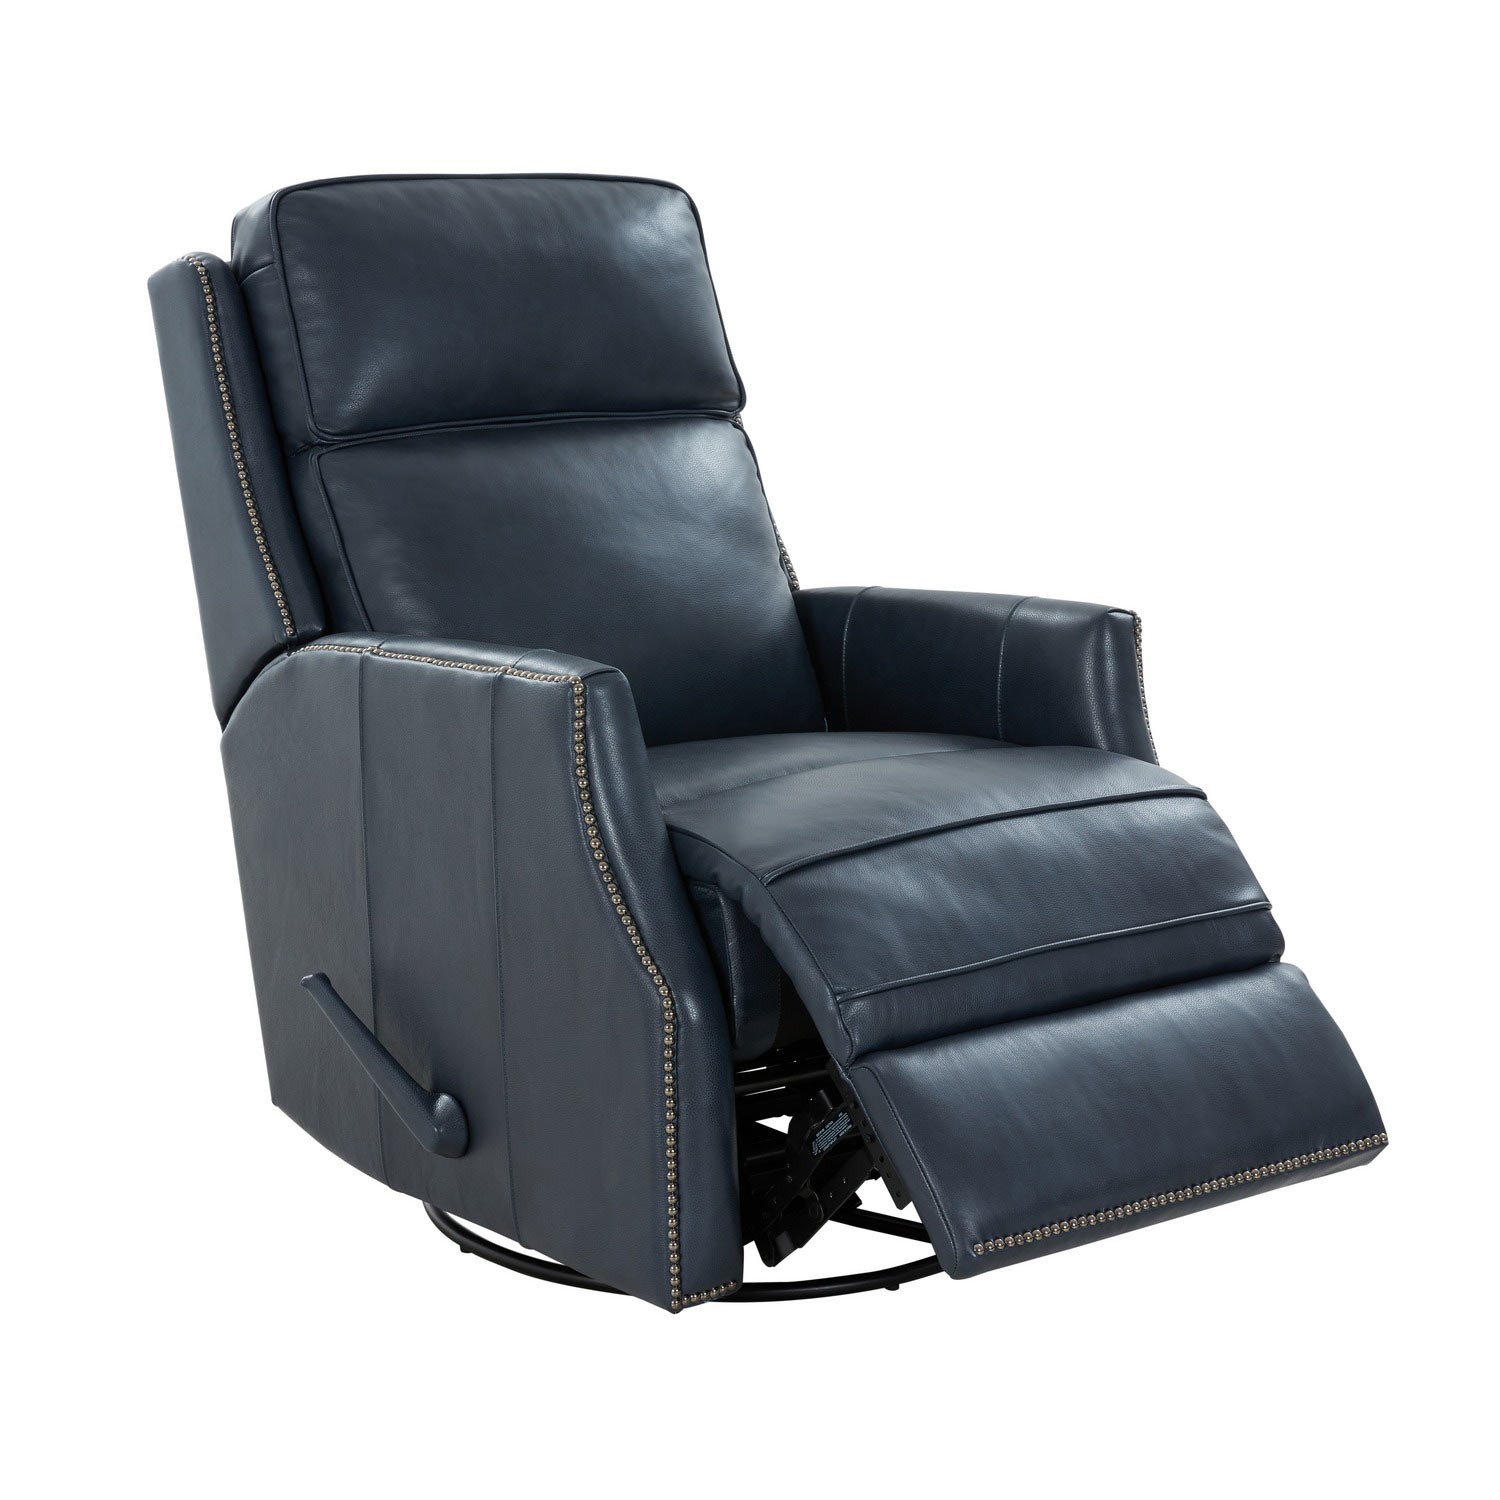 Barcalounger Aniston Swivel Glider Recliner Chair - Barone Navy Blue/All Leather